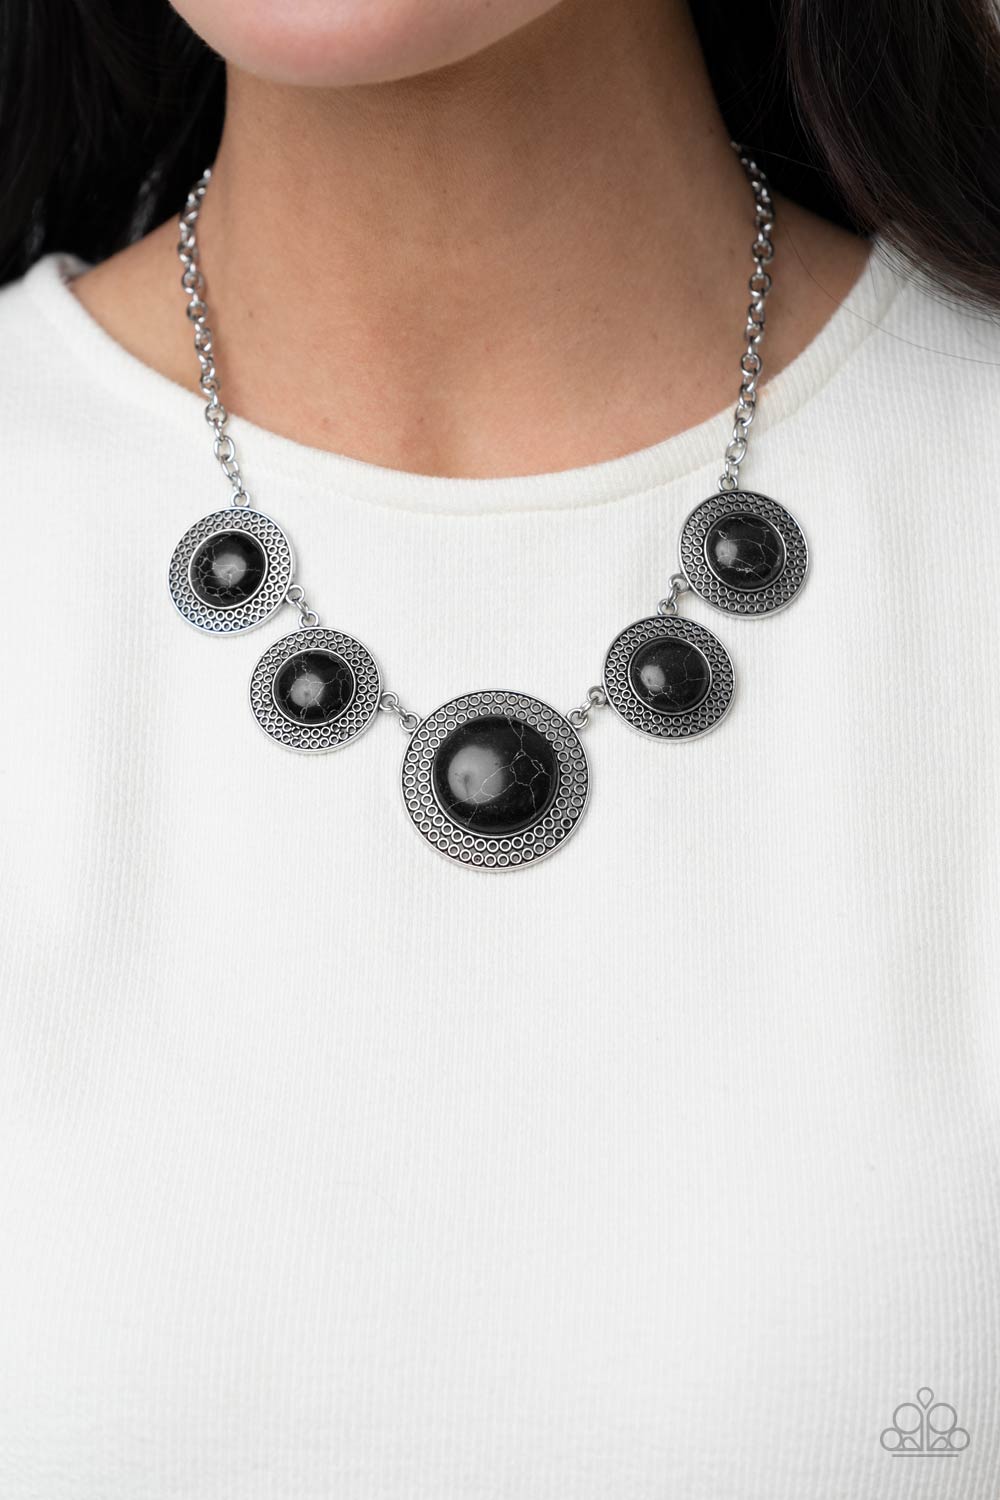 Circle The Wagons - Black - $5 Jewelry with Ashley Swint